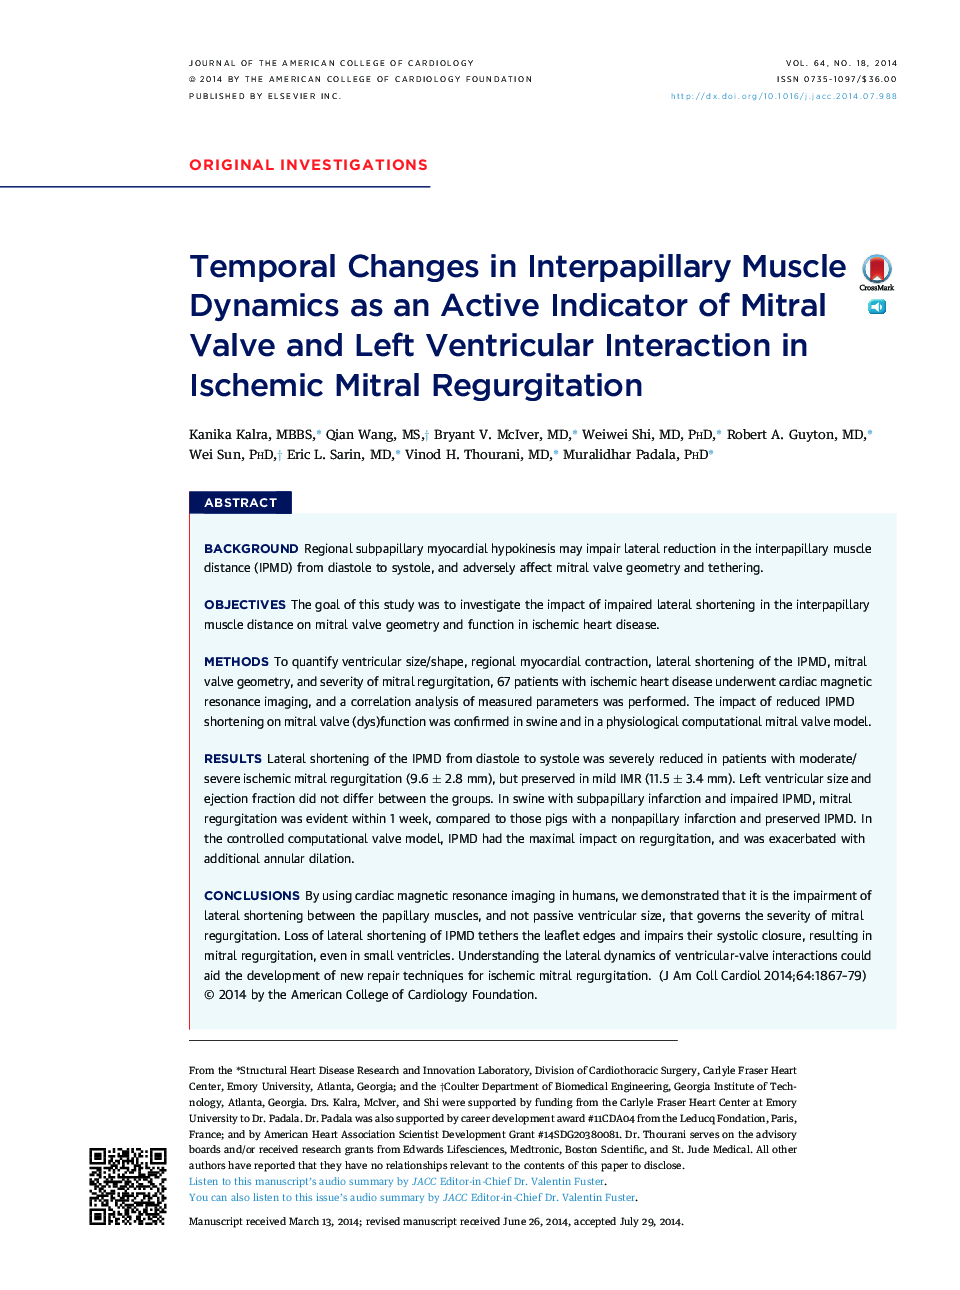 Temporal Changes in Interpapillary Muscle Dynamics as an Active Indicator of Mitral Valve and Left Ventricular Interaction in Ischemic Mitral Regurgitation 